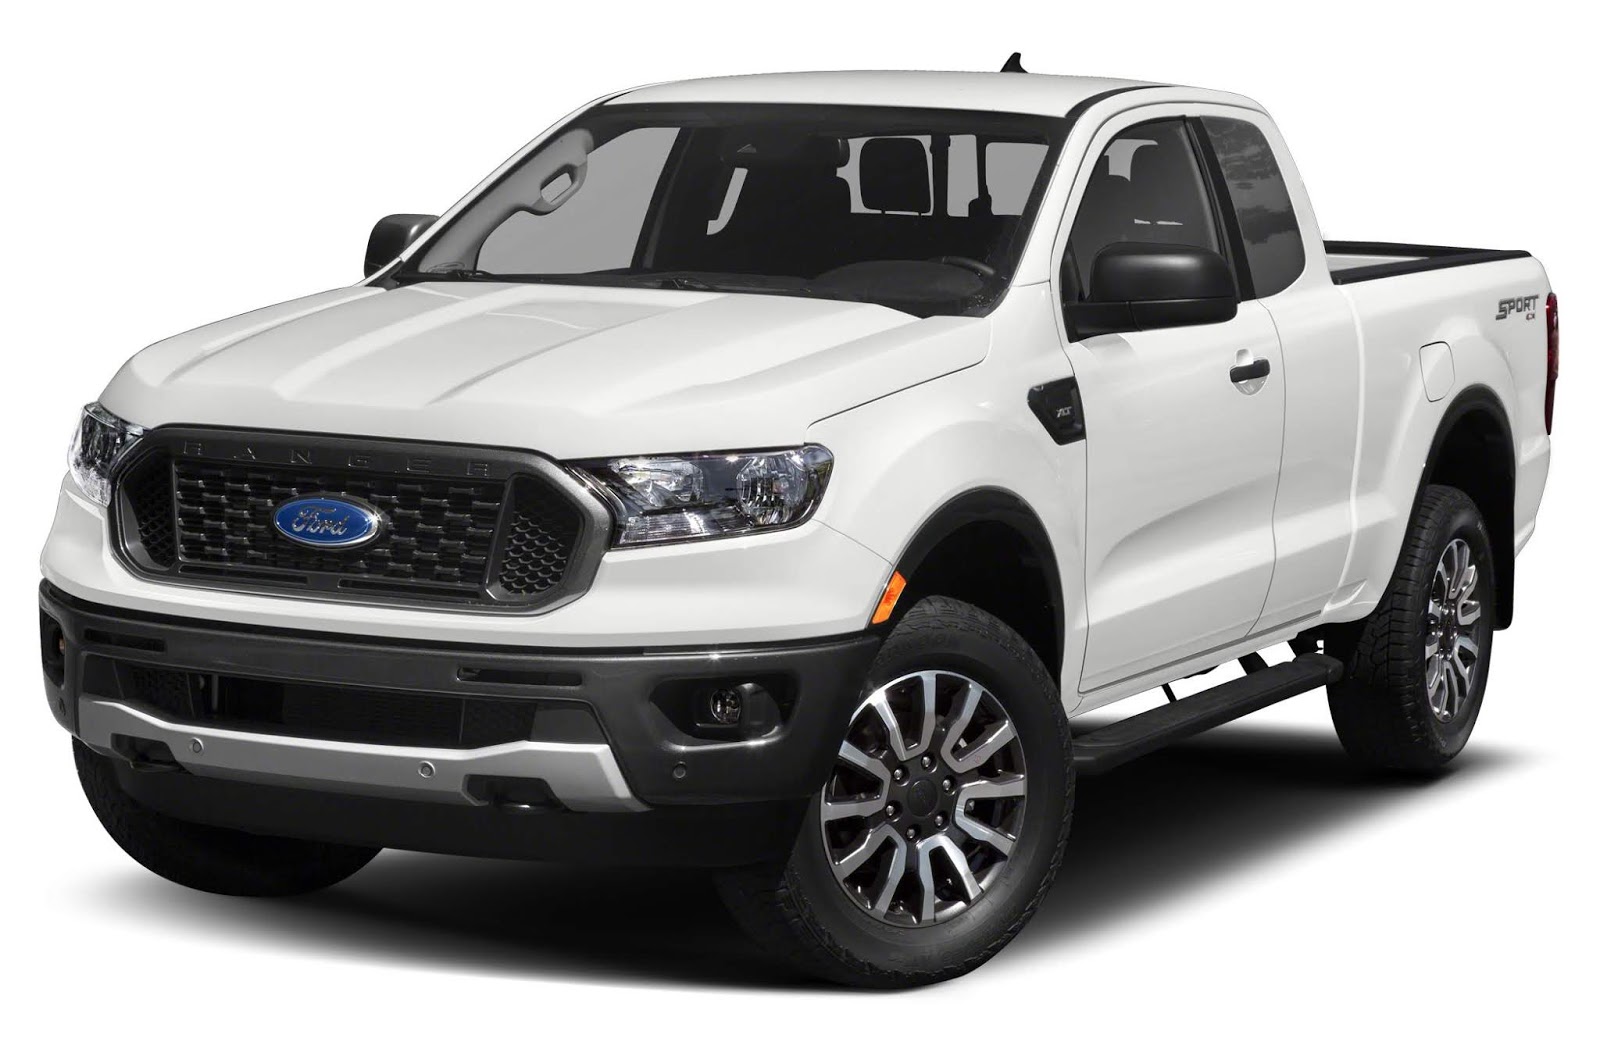 Goldilocks And The One Pickup Truck The 2019 Ford Ranger